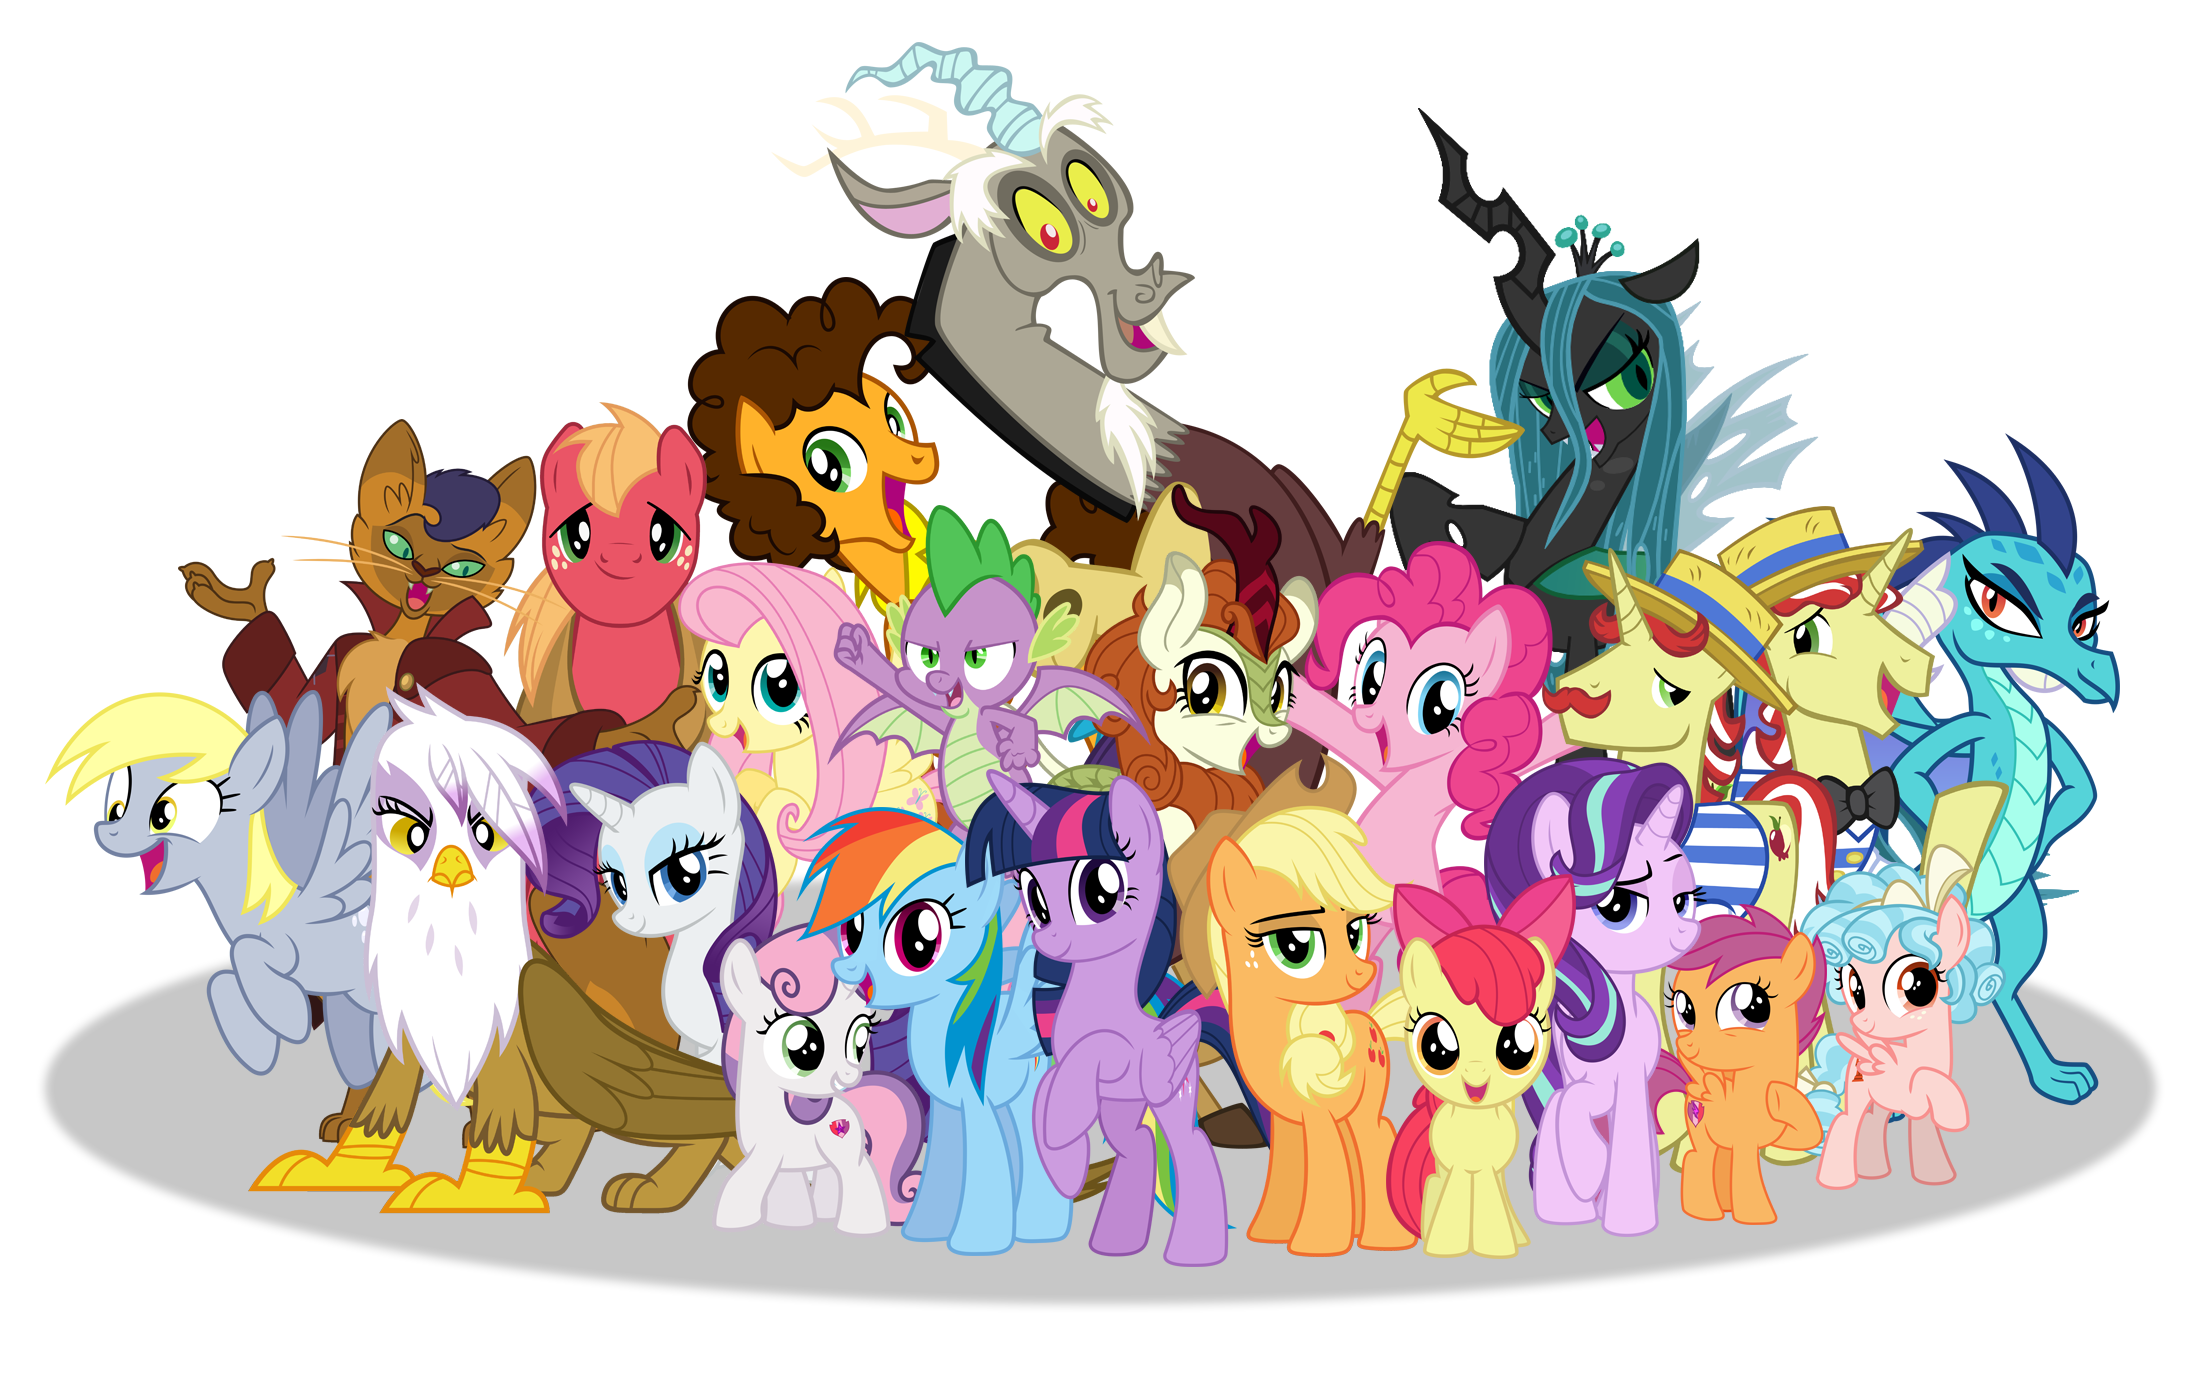 My Top/Best 20 My Little Pony Characters by Amigogogo on DeviantArt